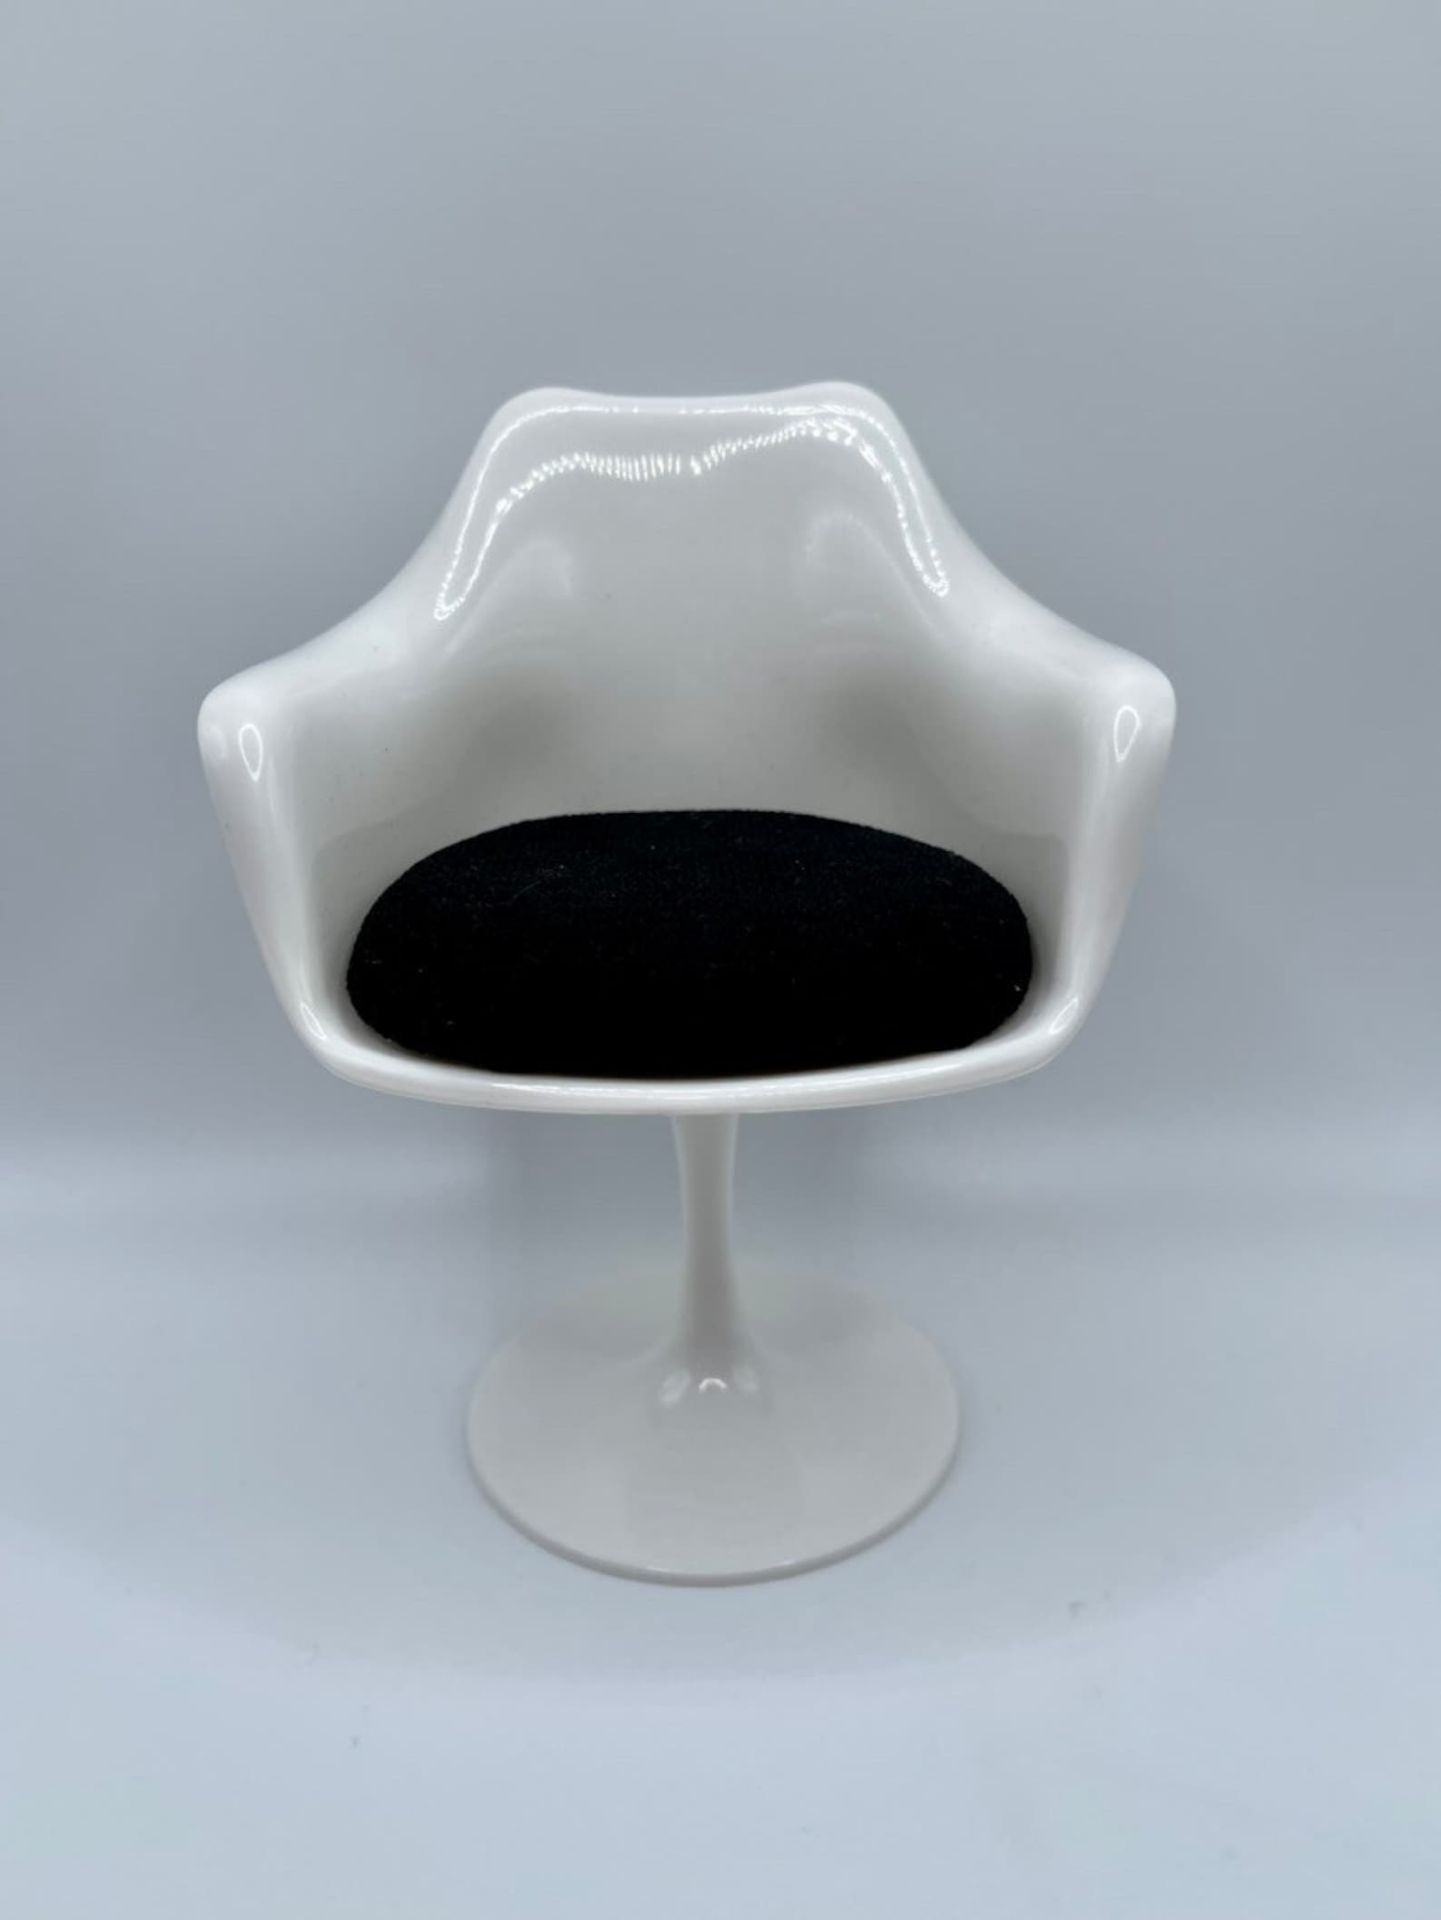 Pair of Tulip Chairs, 1/6 Scale Desk Display - Image 2 of 7